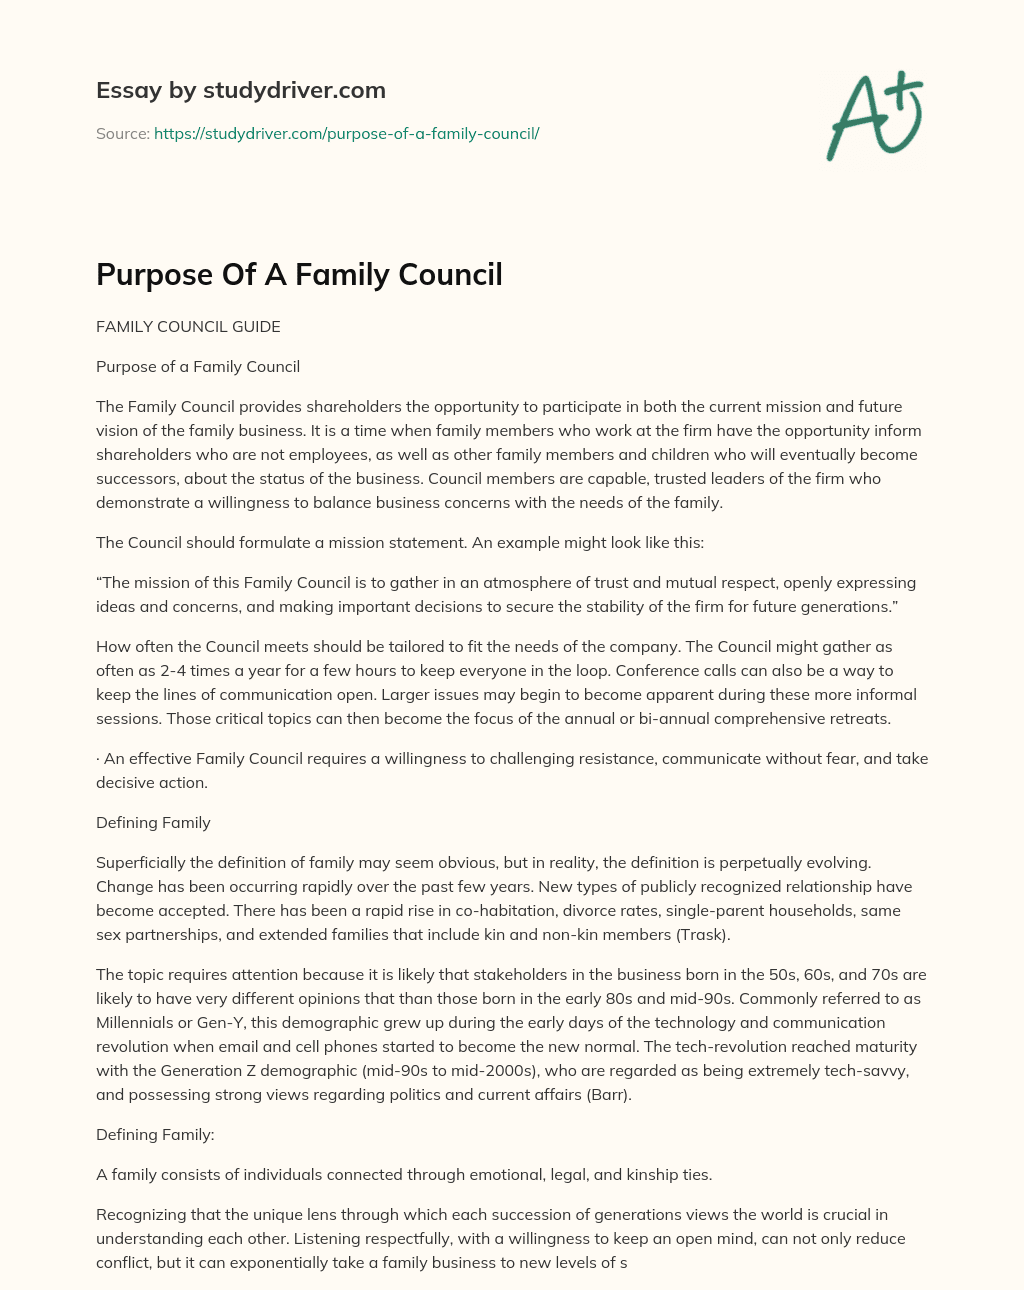 family conflict essay